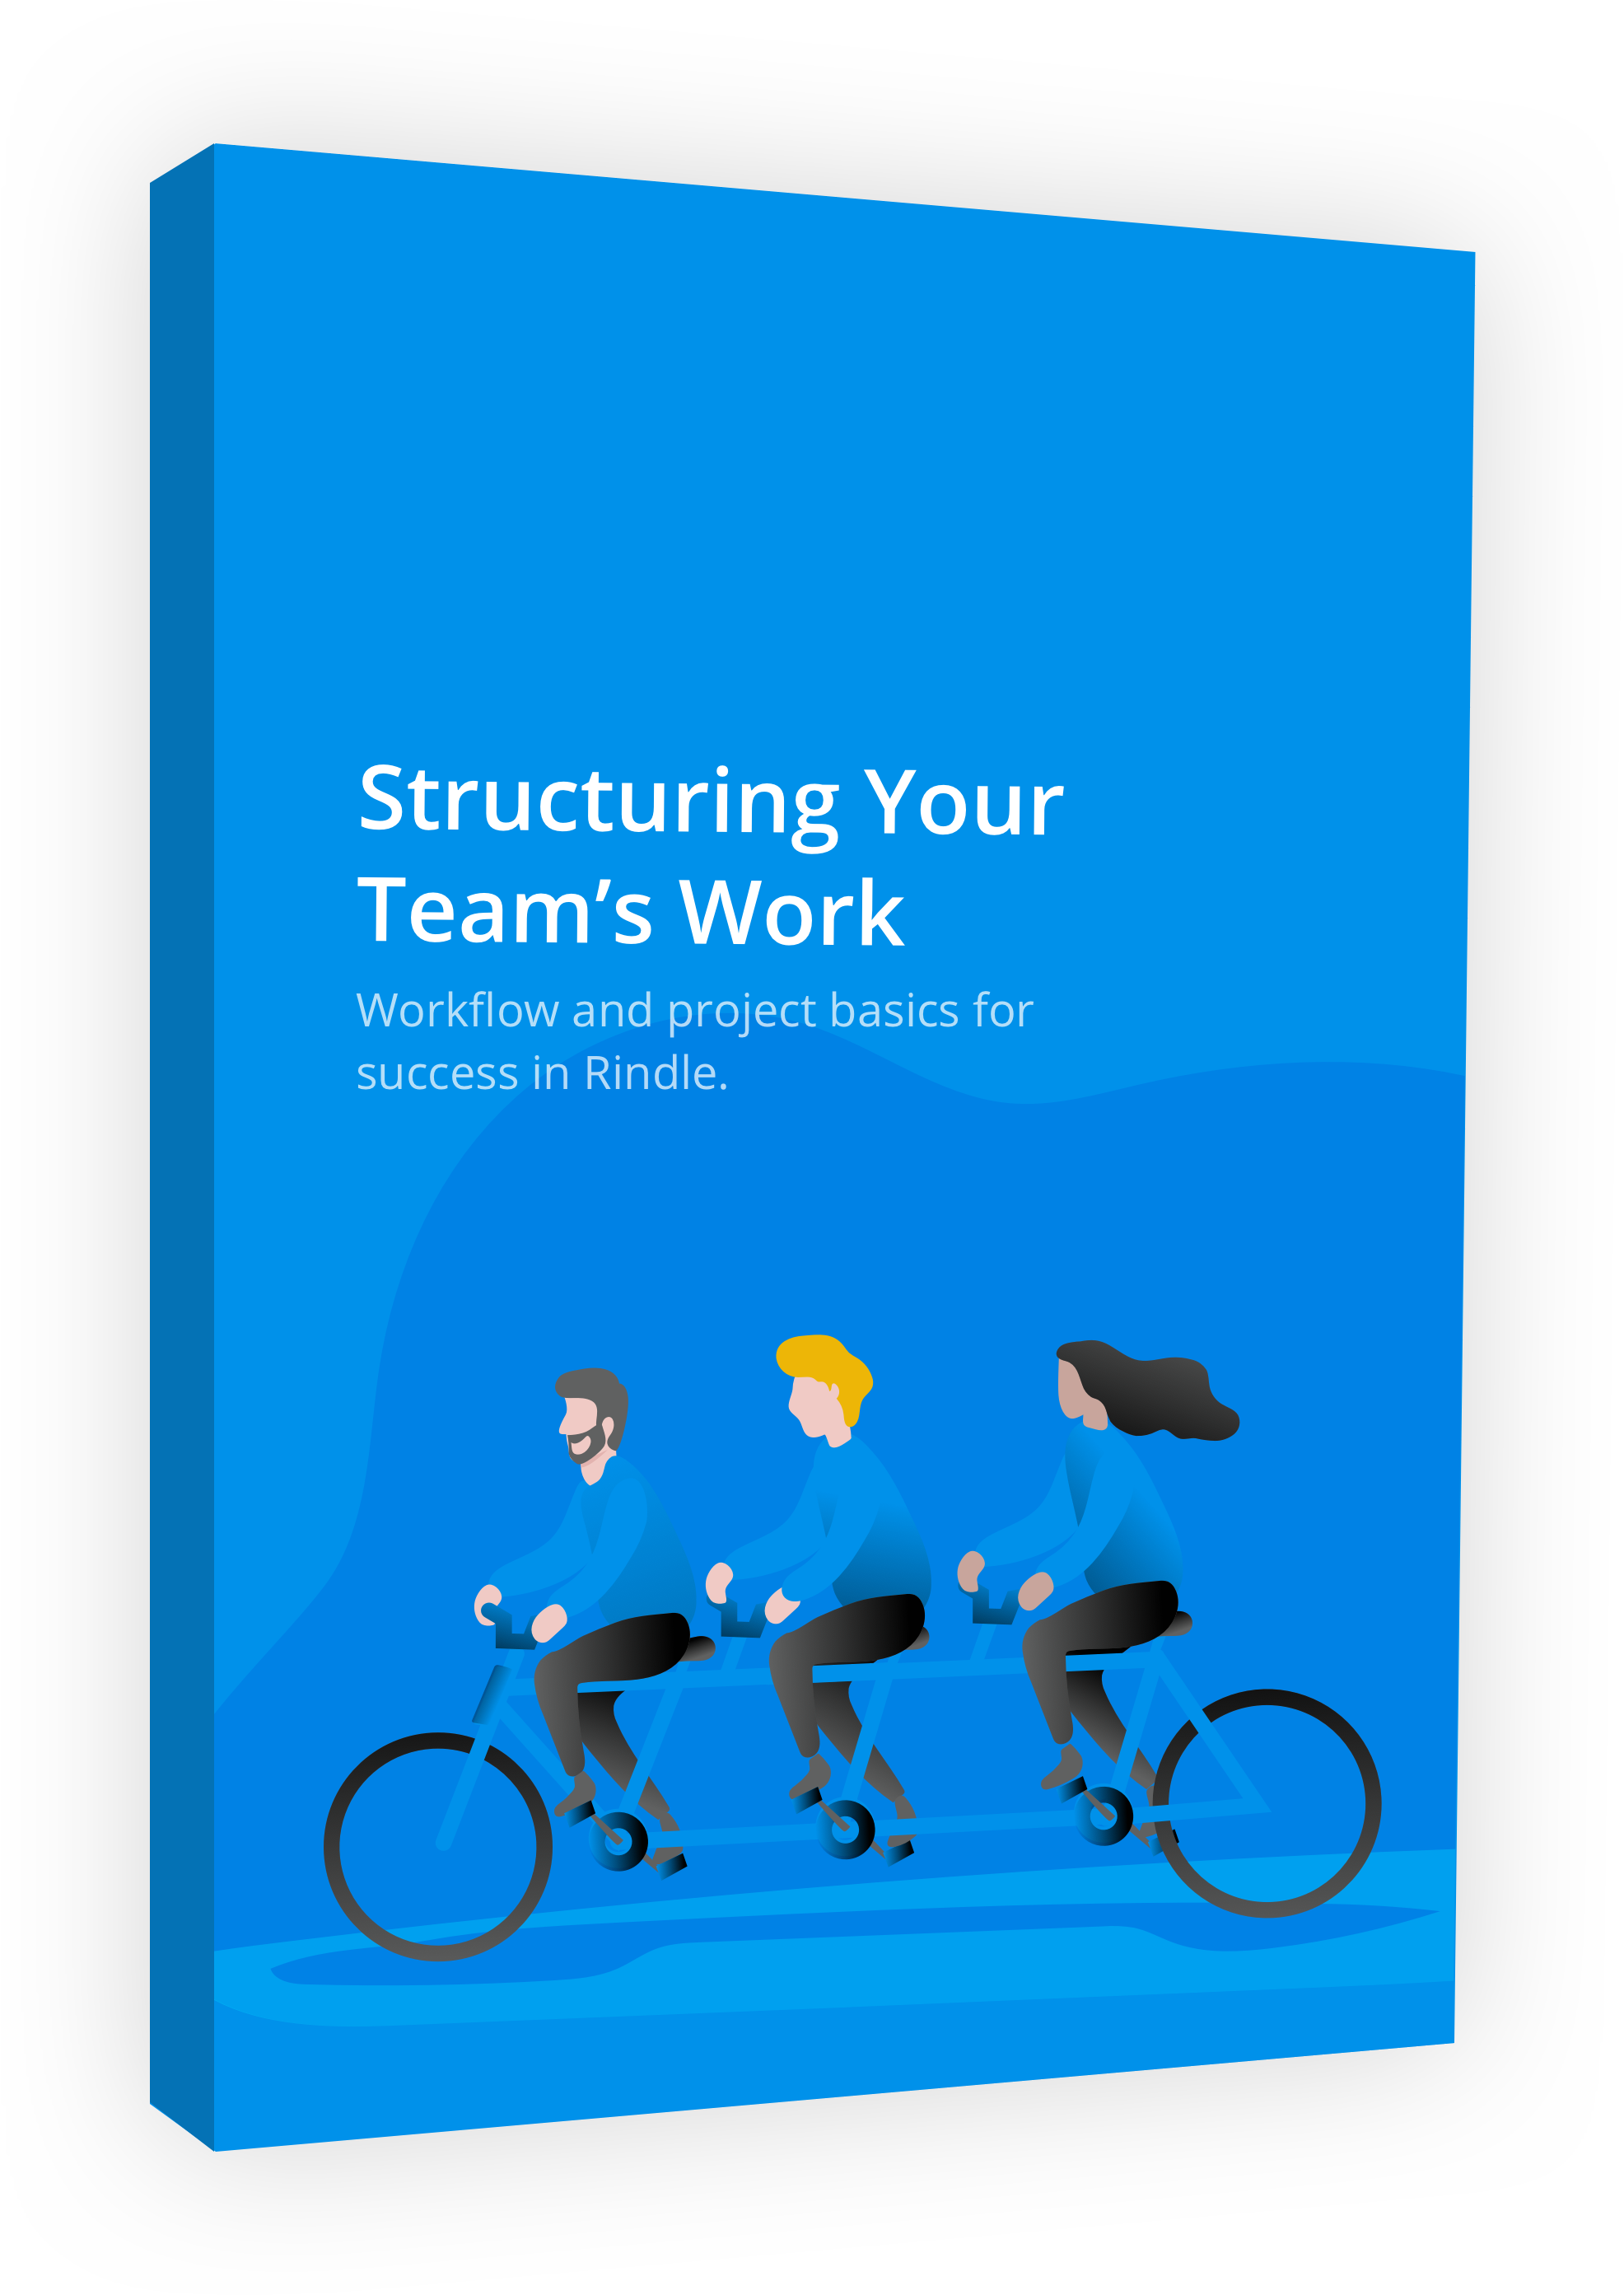 Structuring Your Team’s Work